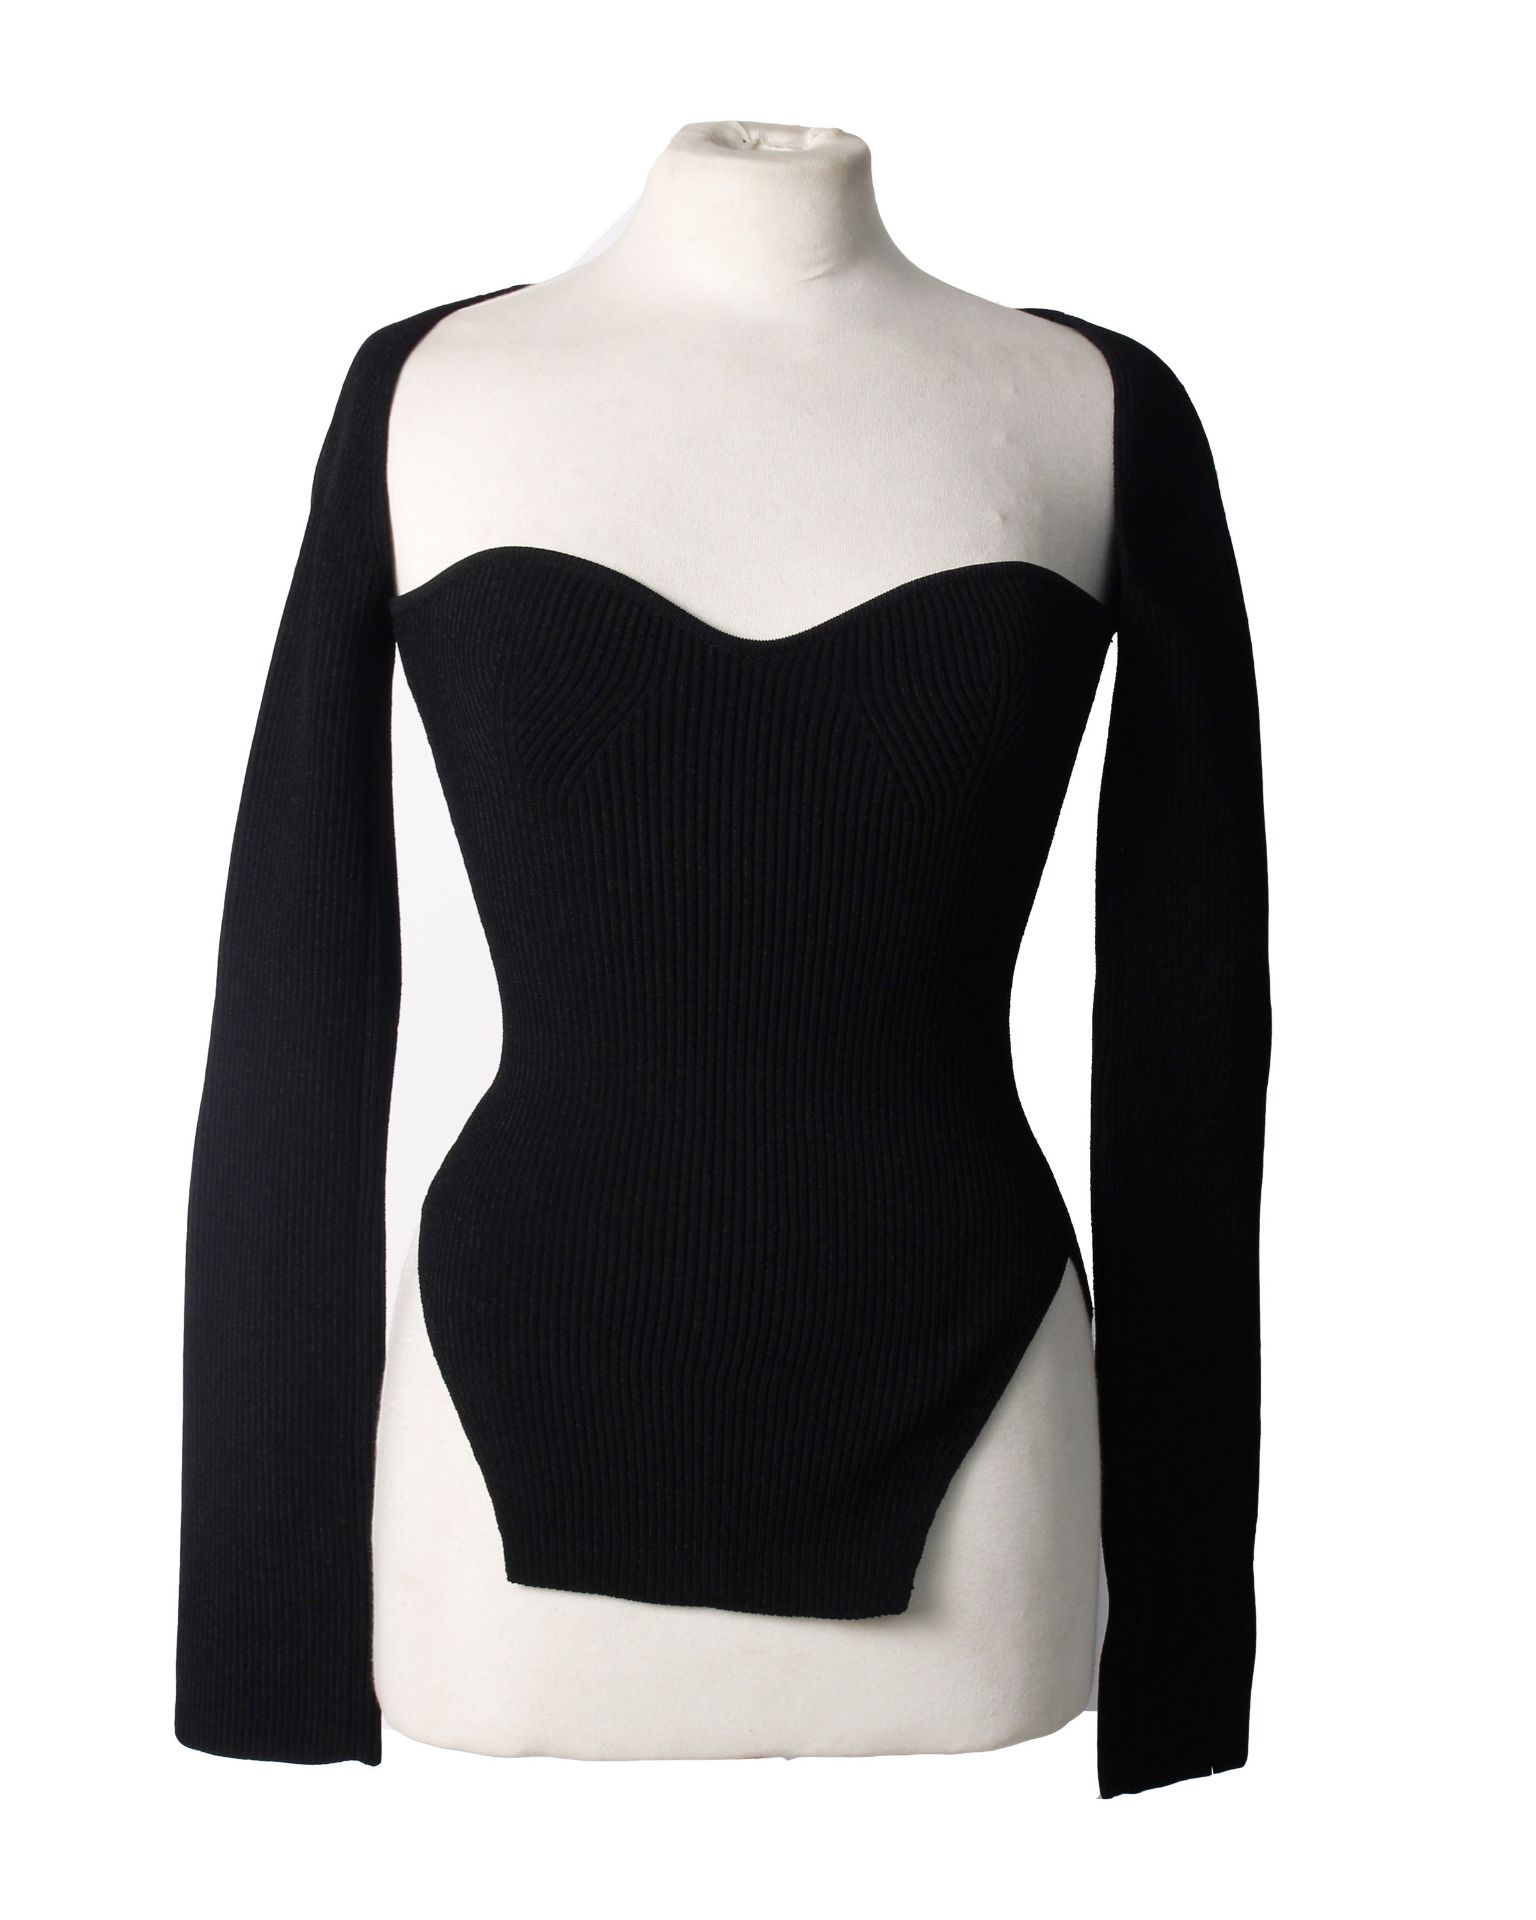 One lady's as new Khaite Maddy long bustier top in black (M).